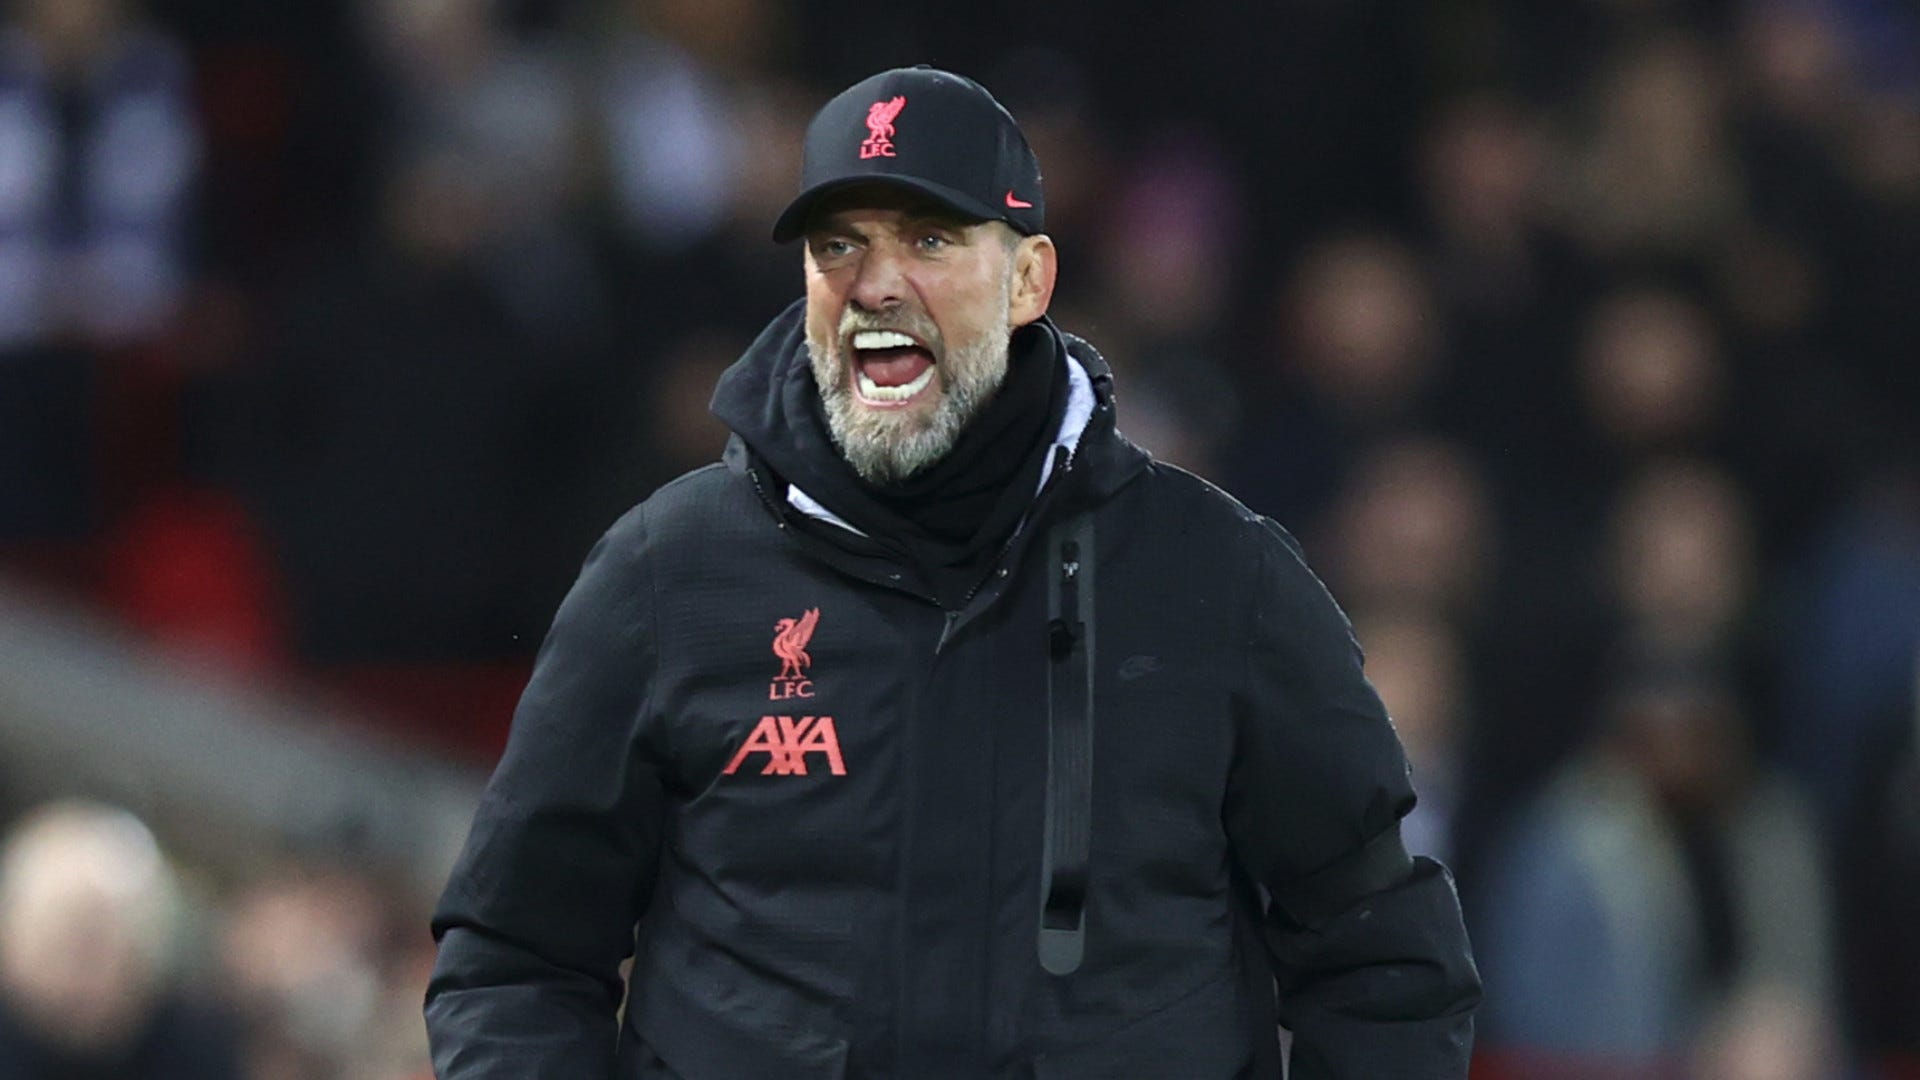 Like talking to my microwave' - Klopp bemoans unresponsive officials as Liverpool slip to costly defeat at Brentford | Goal.com